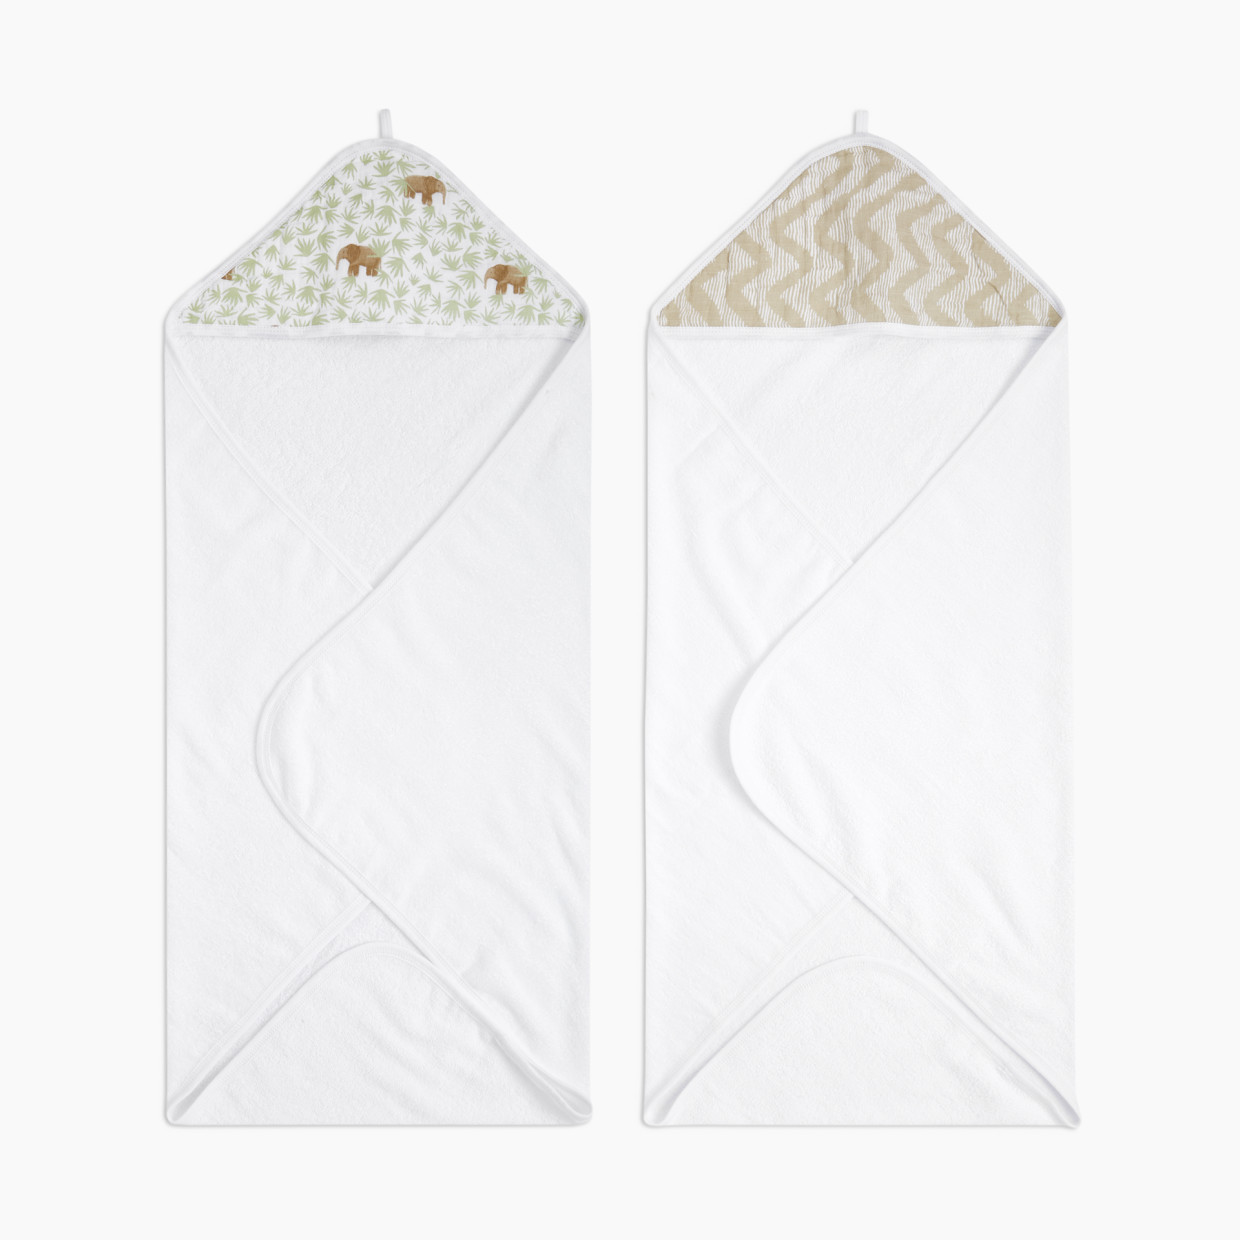 Aden + Anais Essentials Hooded Towels (2 Pack) - Tanzania.